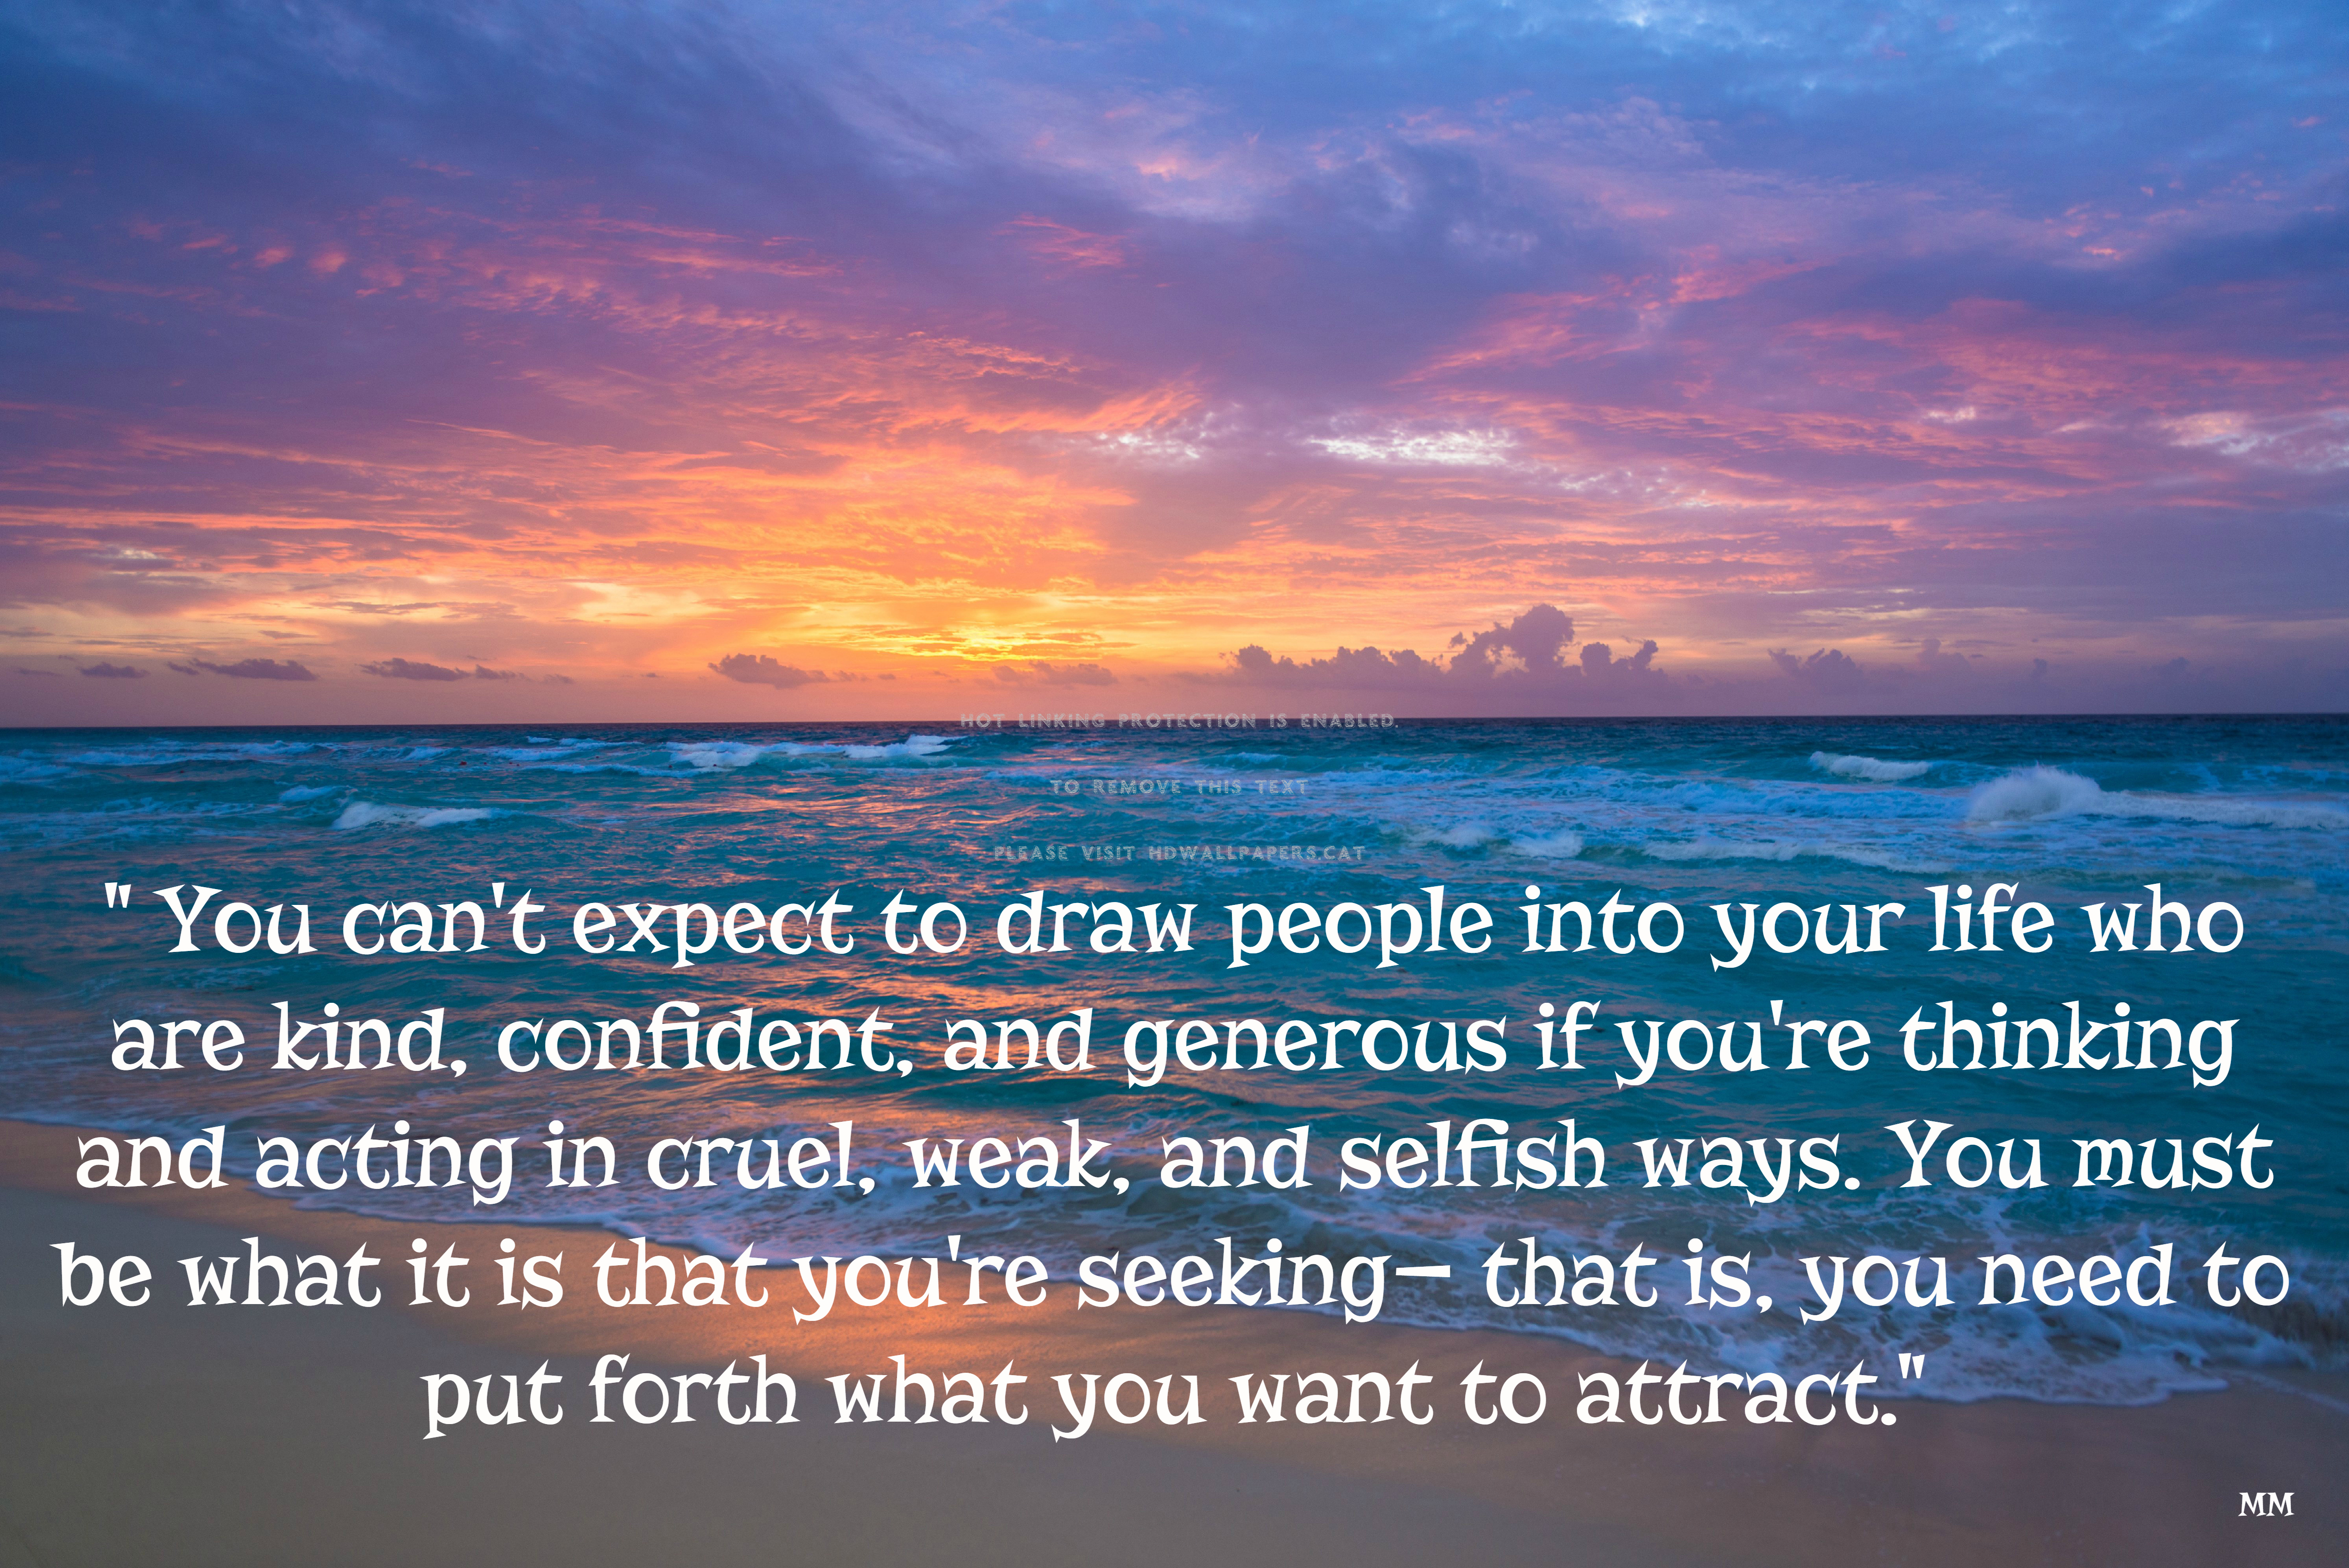 Law Of Attraction Nature Beach Words Quotes - Desktop Background Law Of Attraction - HD Wallpaper 